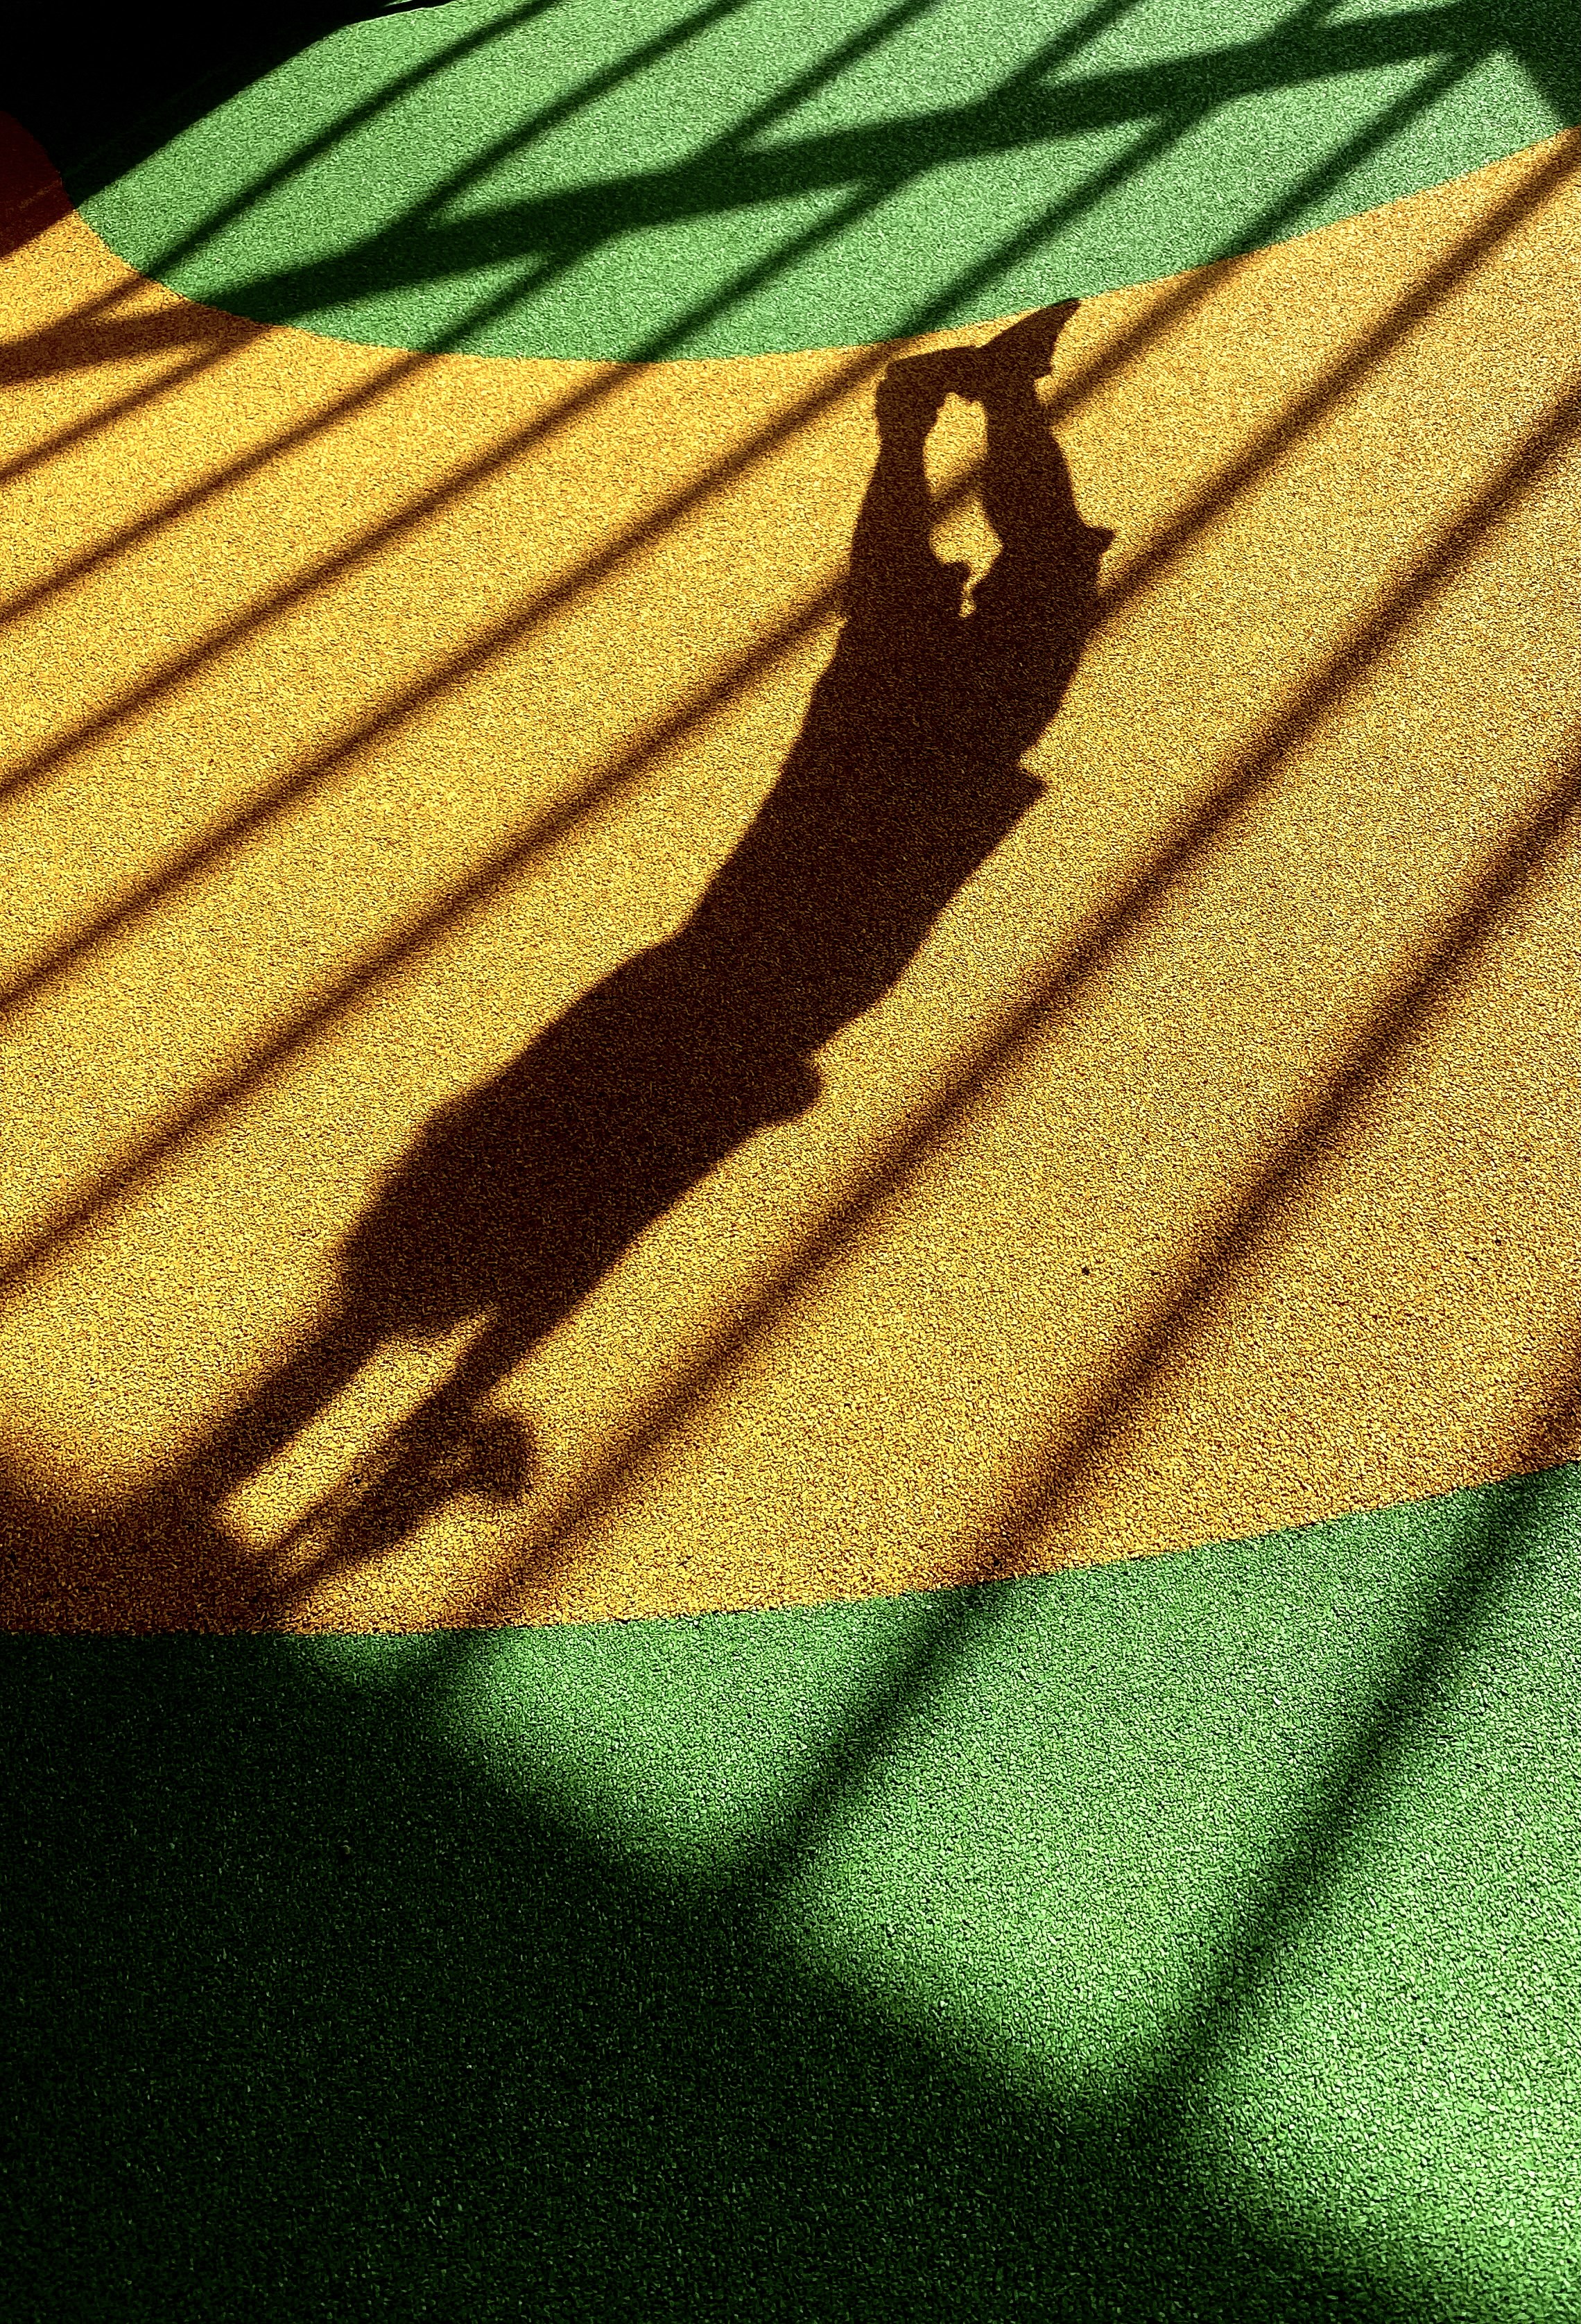 An abstract photo of a basketball court